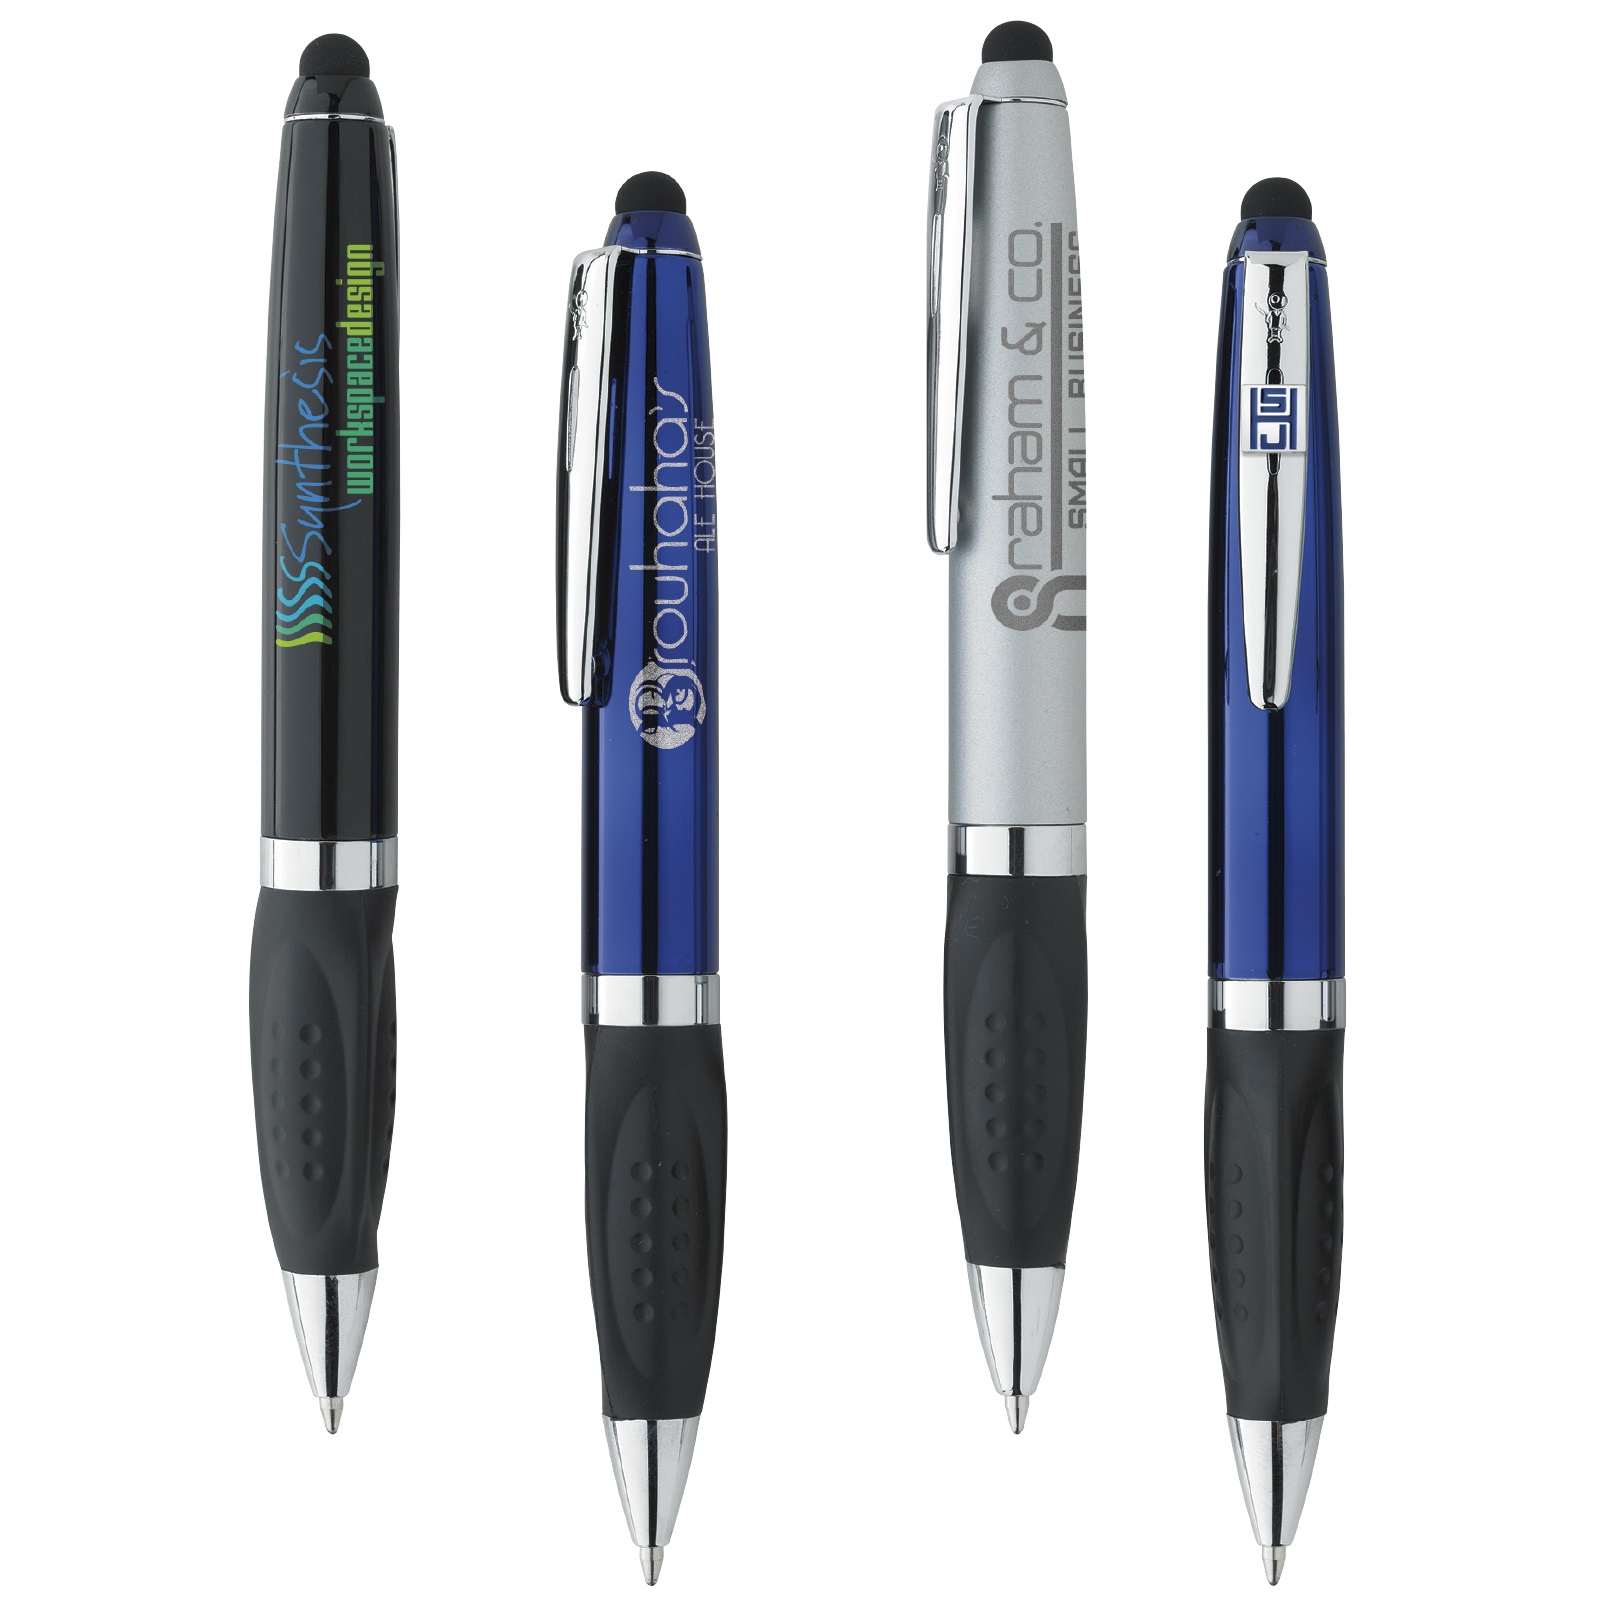 Benefits of Using Promotional Pens for Business Marketing Needs